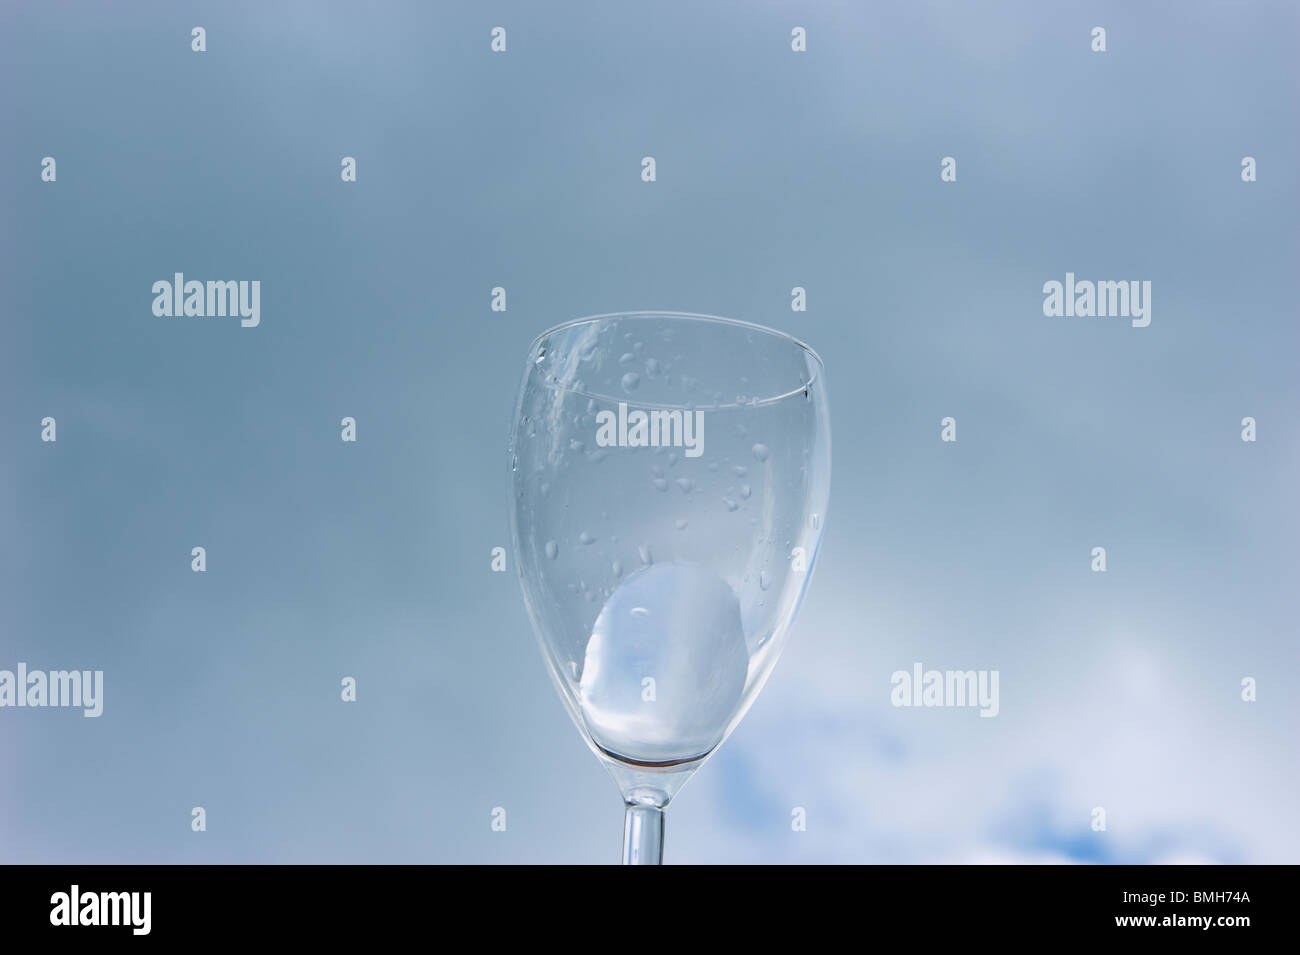 water streams out of an glass in front of a blue cloudy sky Stock Photo